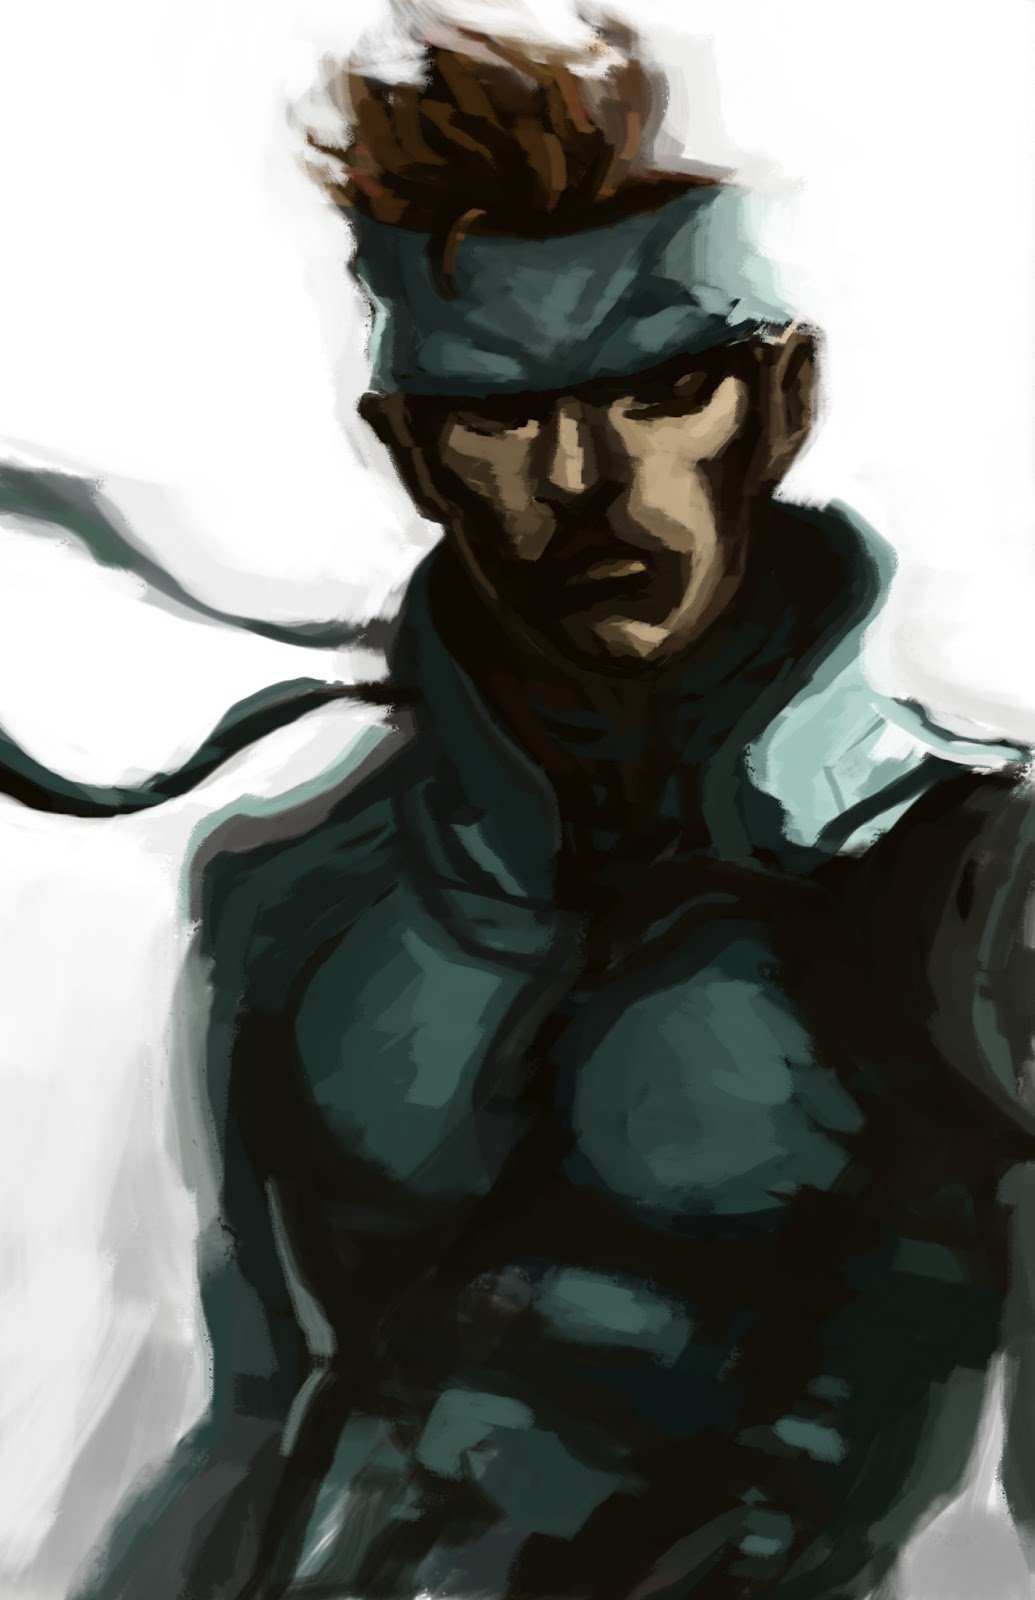 Only the Snake is the true Hero (Solid Snake)